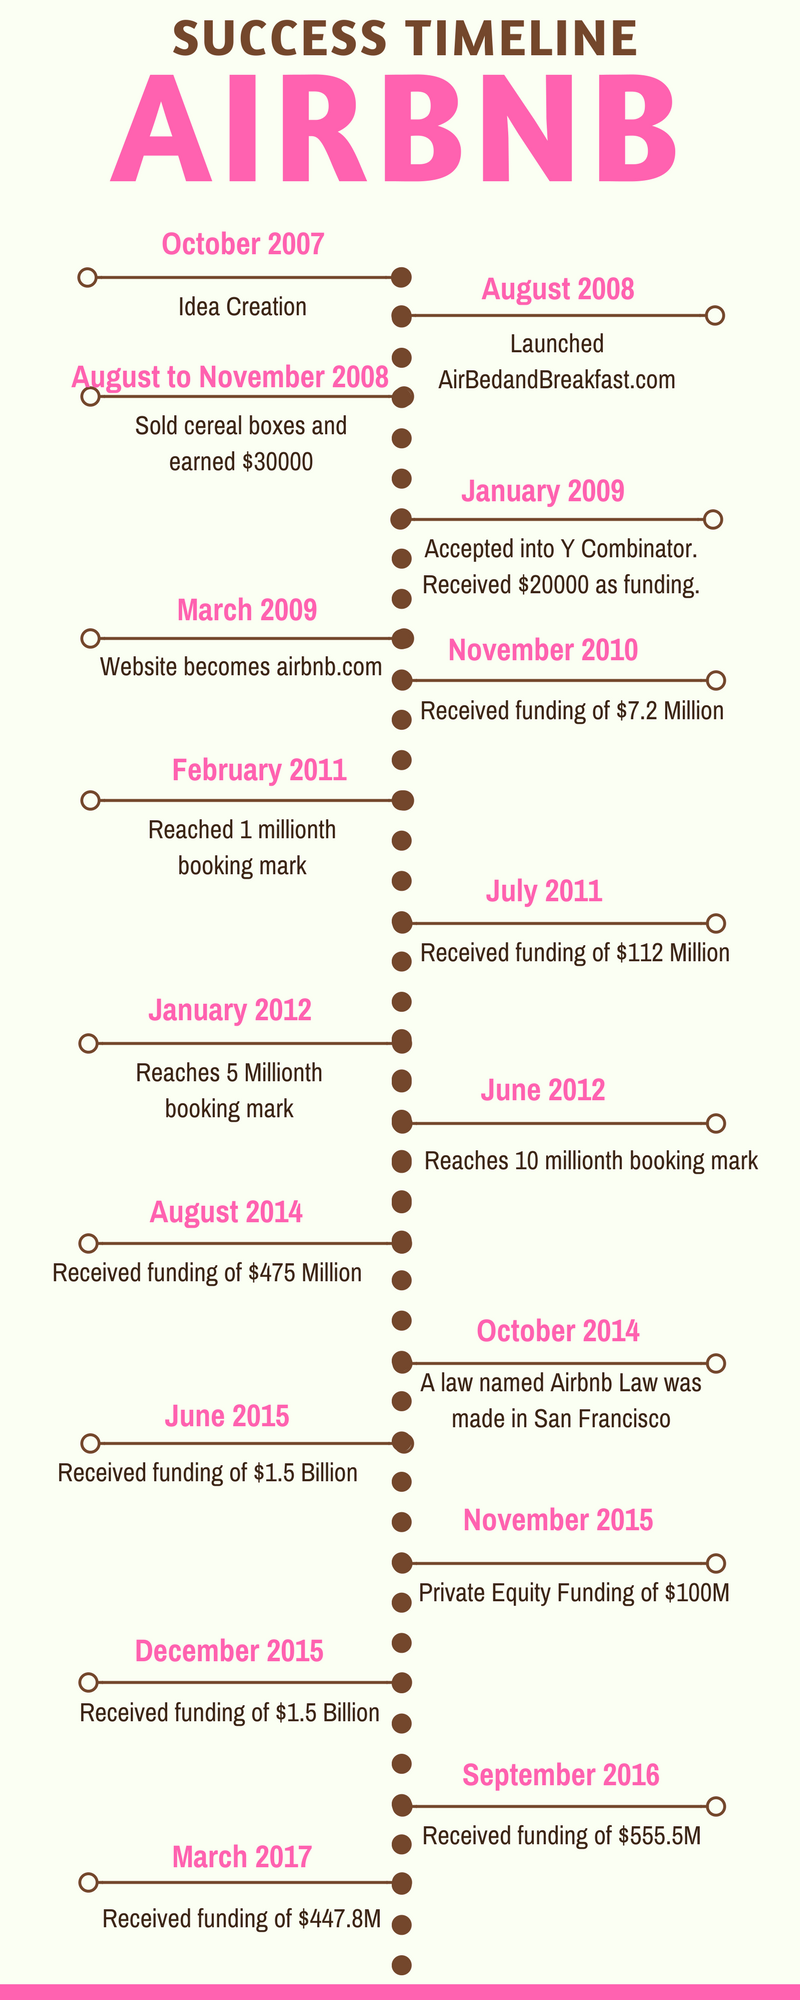 airbnb success timeline 